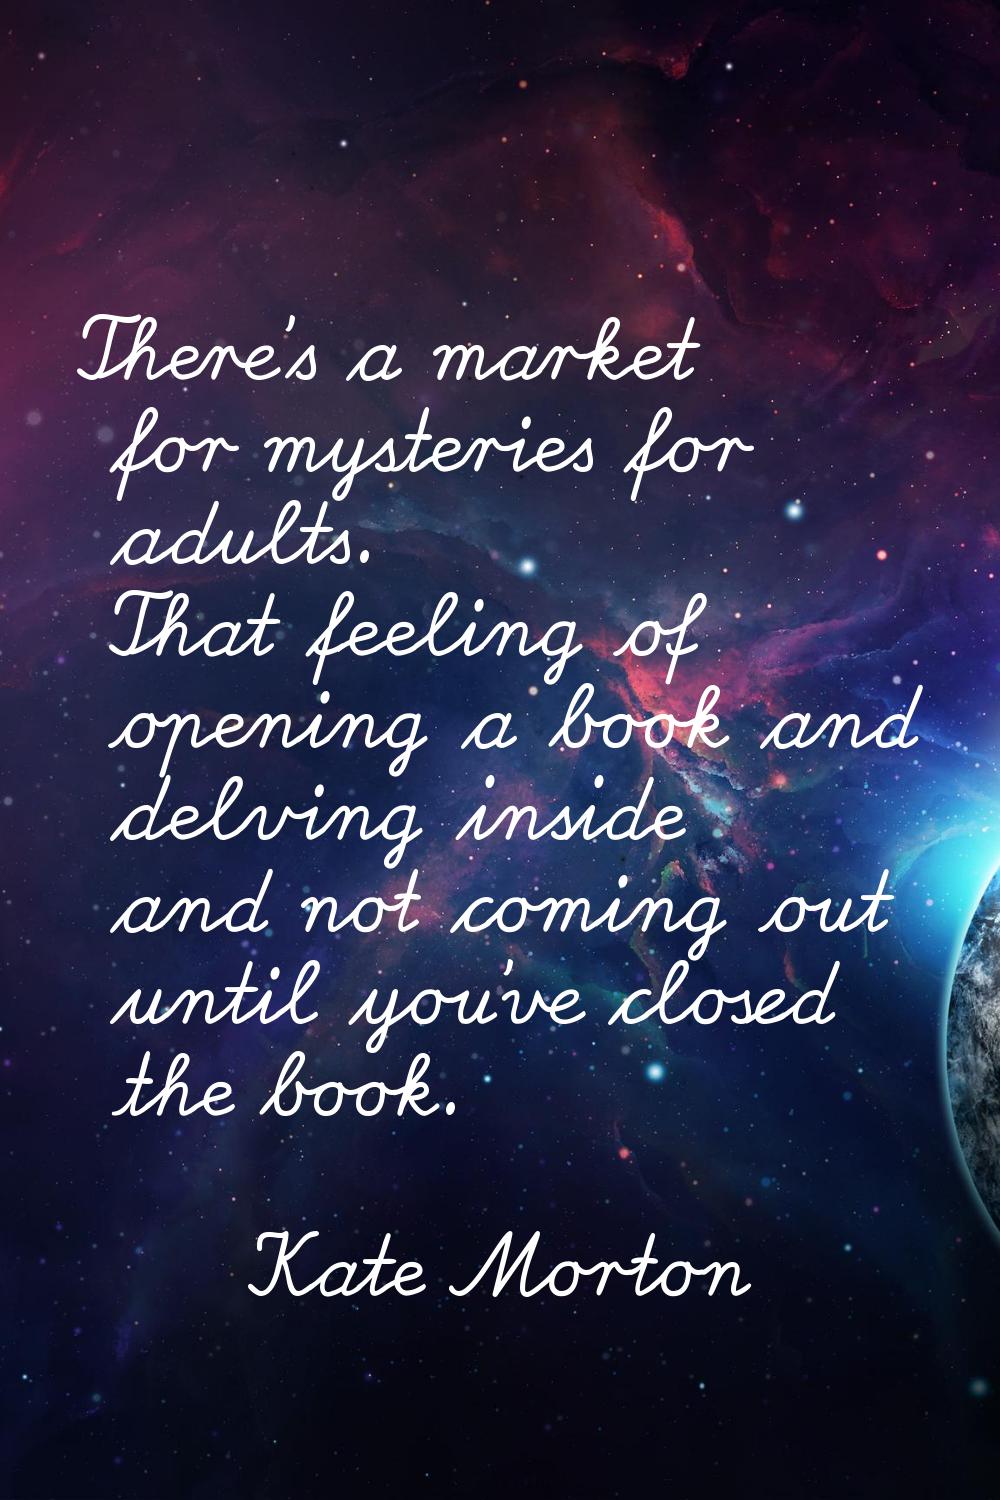 There's a market for mysteries for adults. That feeling of opening a book and delving inside and no